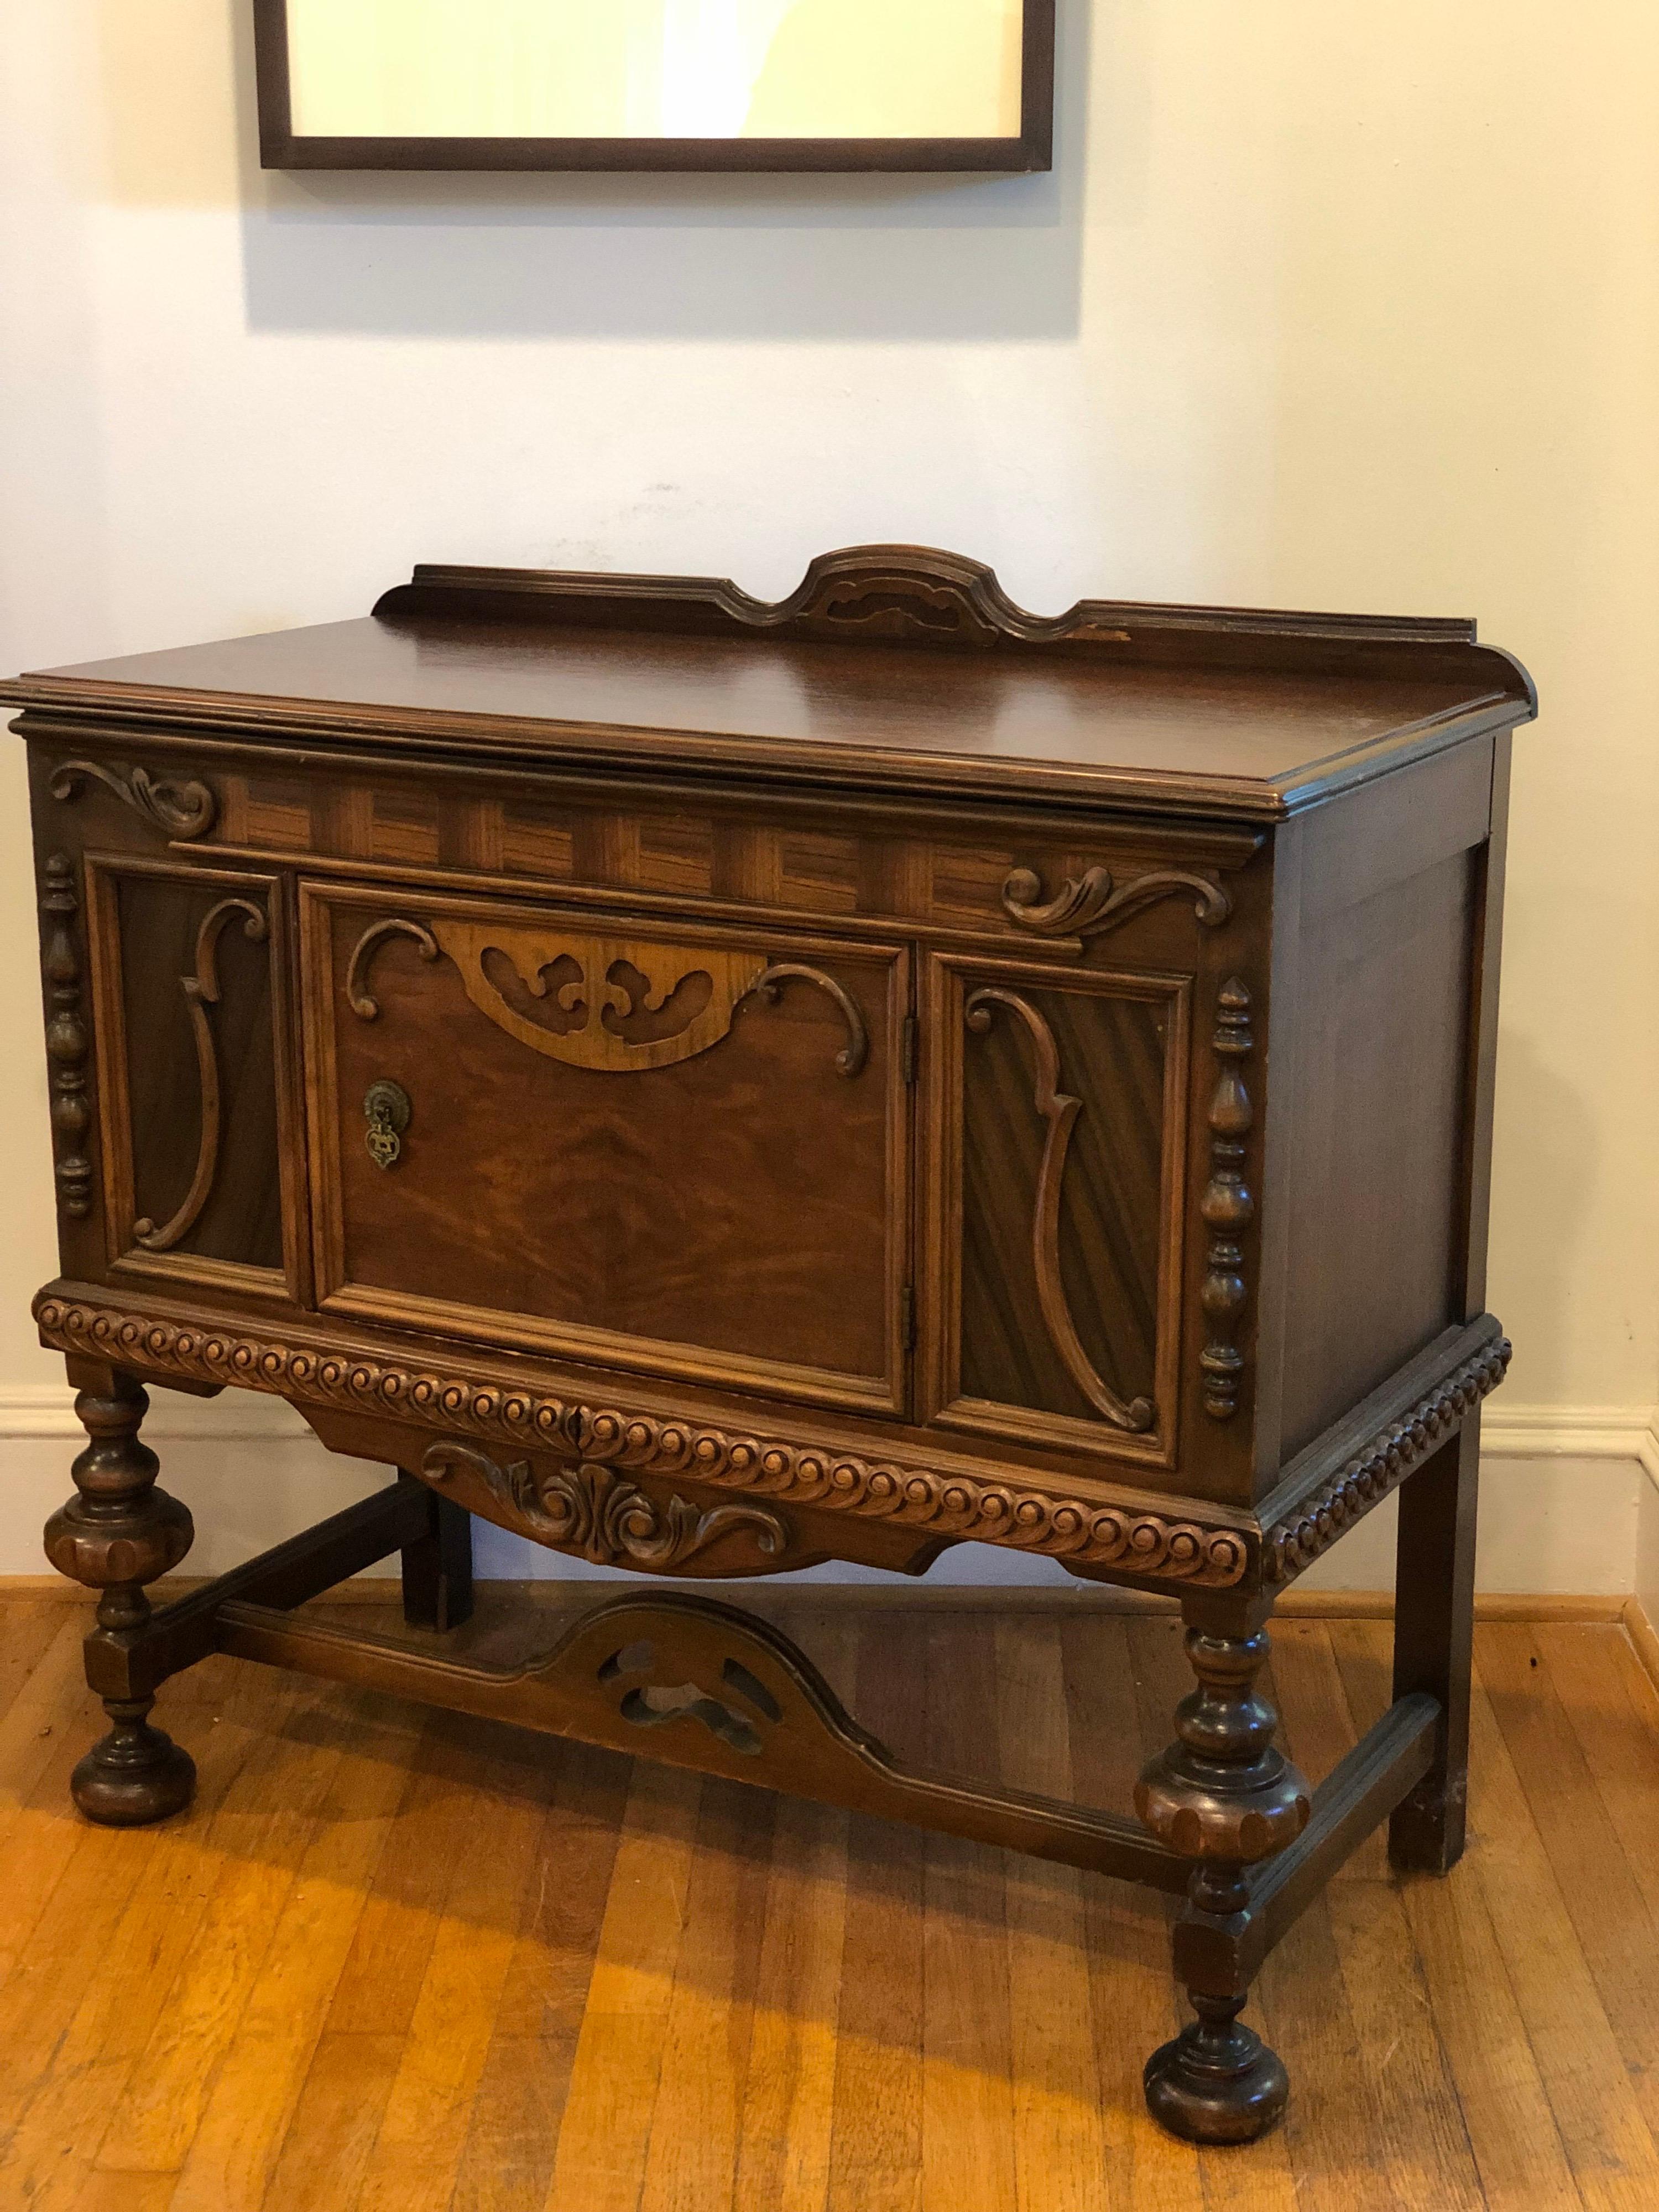 Early Jacobean/Elizabethan/Georgian revival buffet or sideboard.
Cabinet has one solid door with lots of storage for dishes, etc. 
Carvings in the doors and turned baluster legs.
Measures approx 39” x 18 x 34.